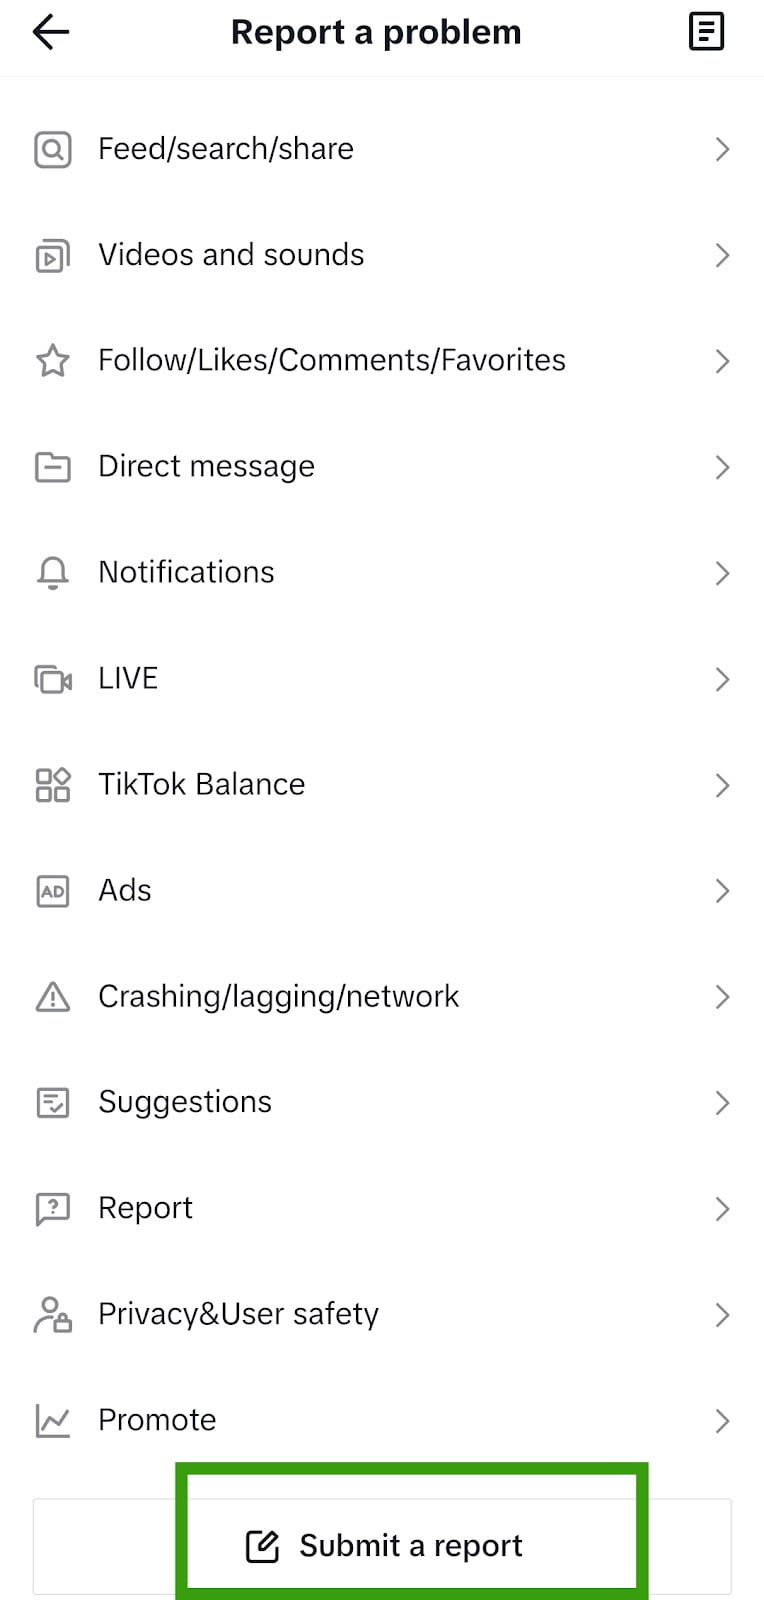 How To Contact Tiktok Support Direct From The Mobile App